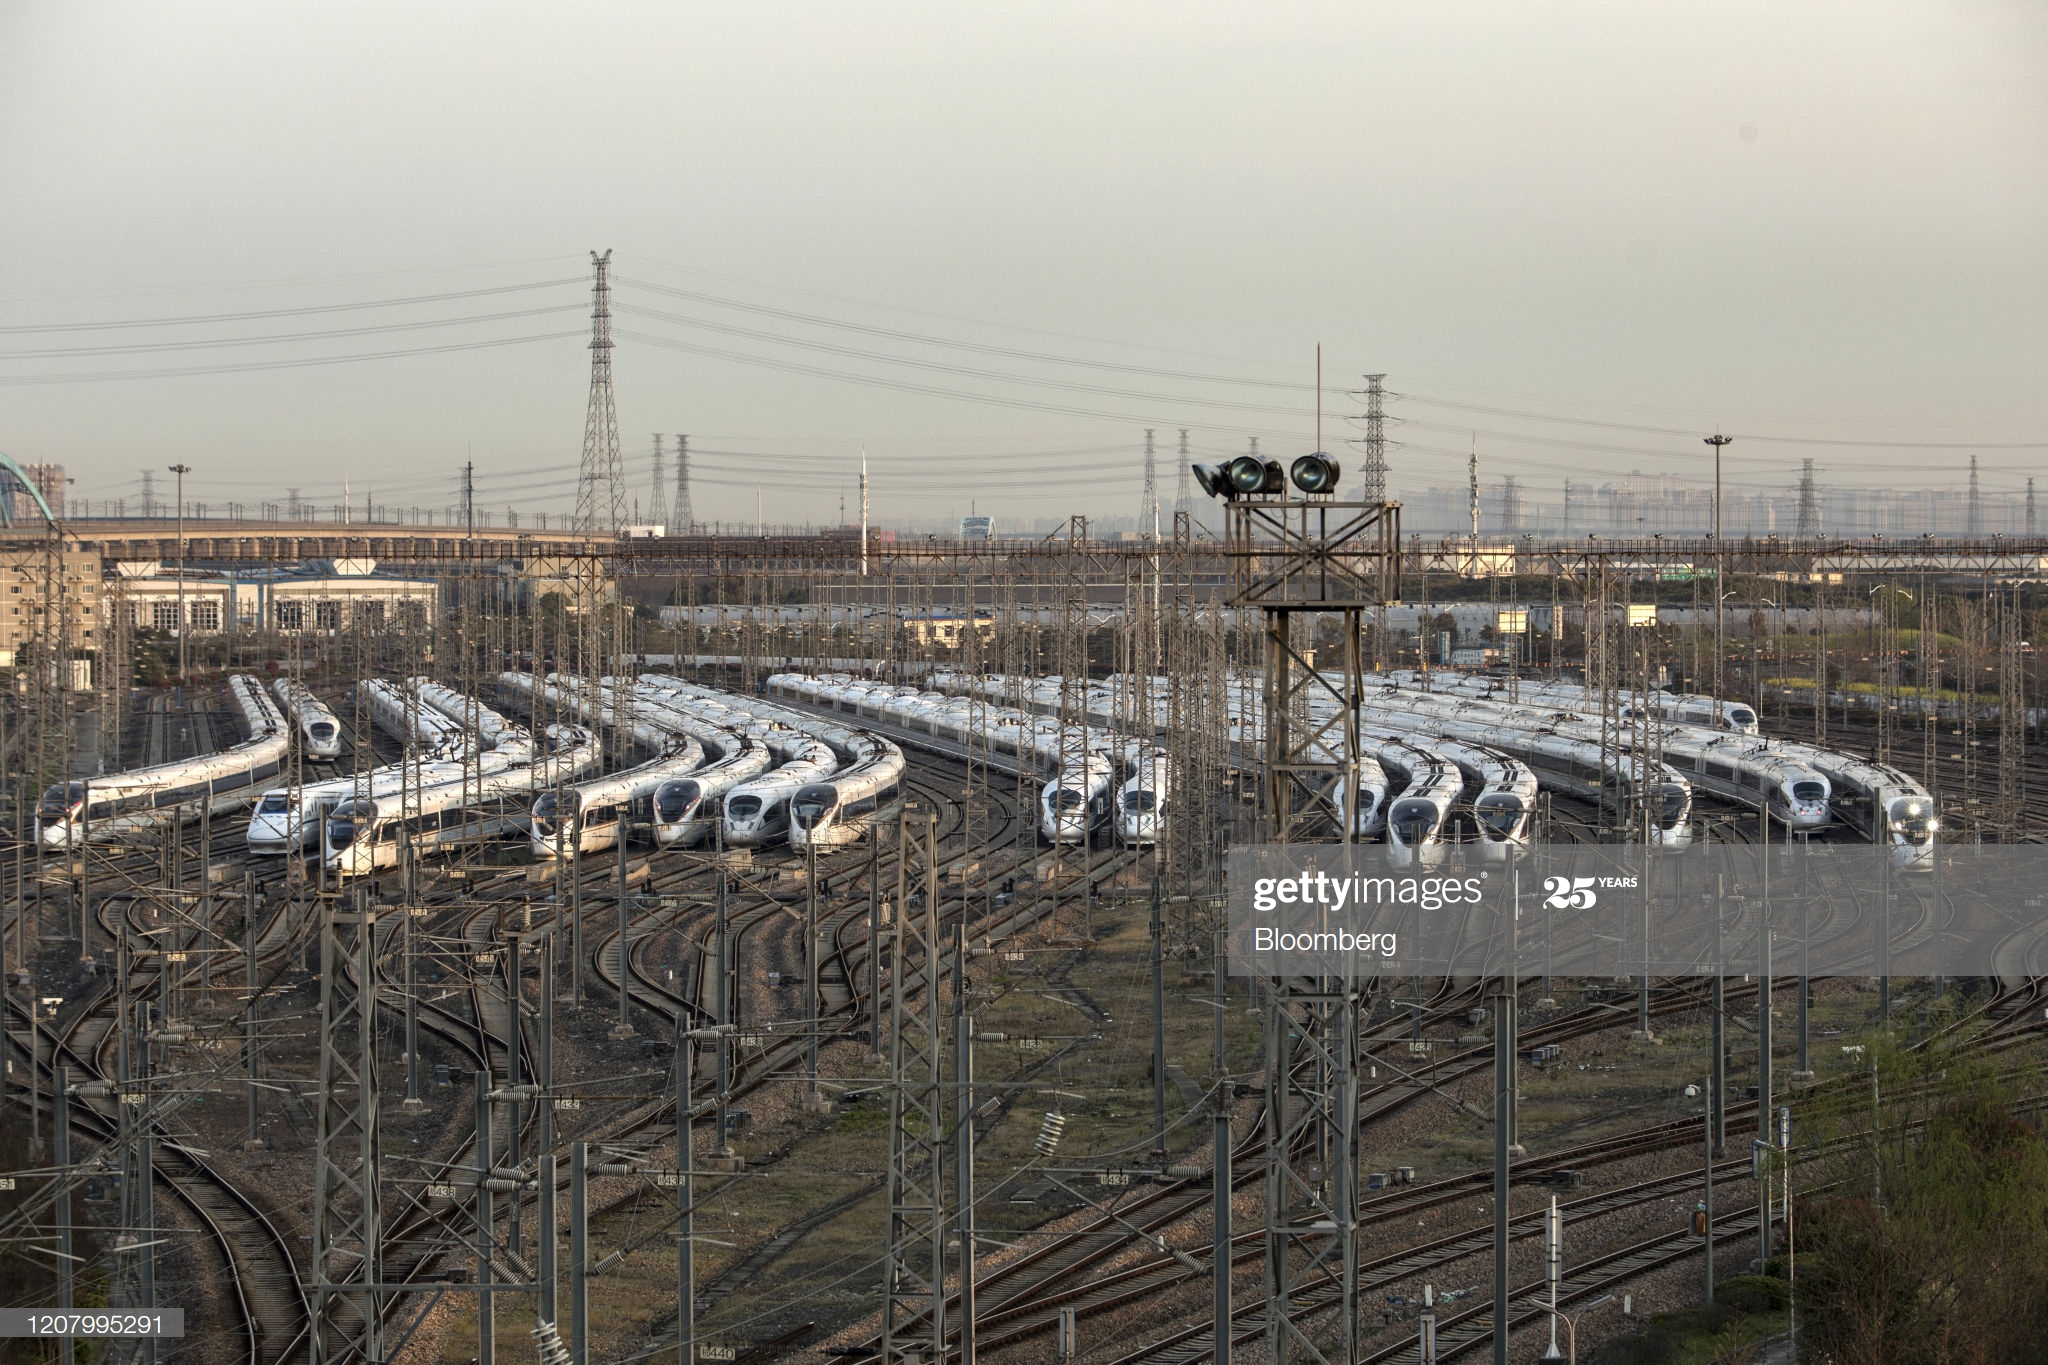 china-railway-highspeed-trains-operated-by-china-railway-corp-sit-in-picture-id1207995291